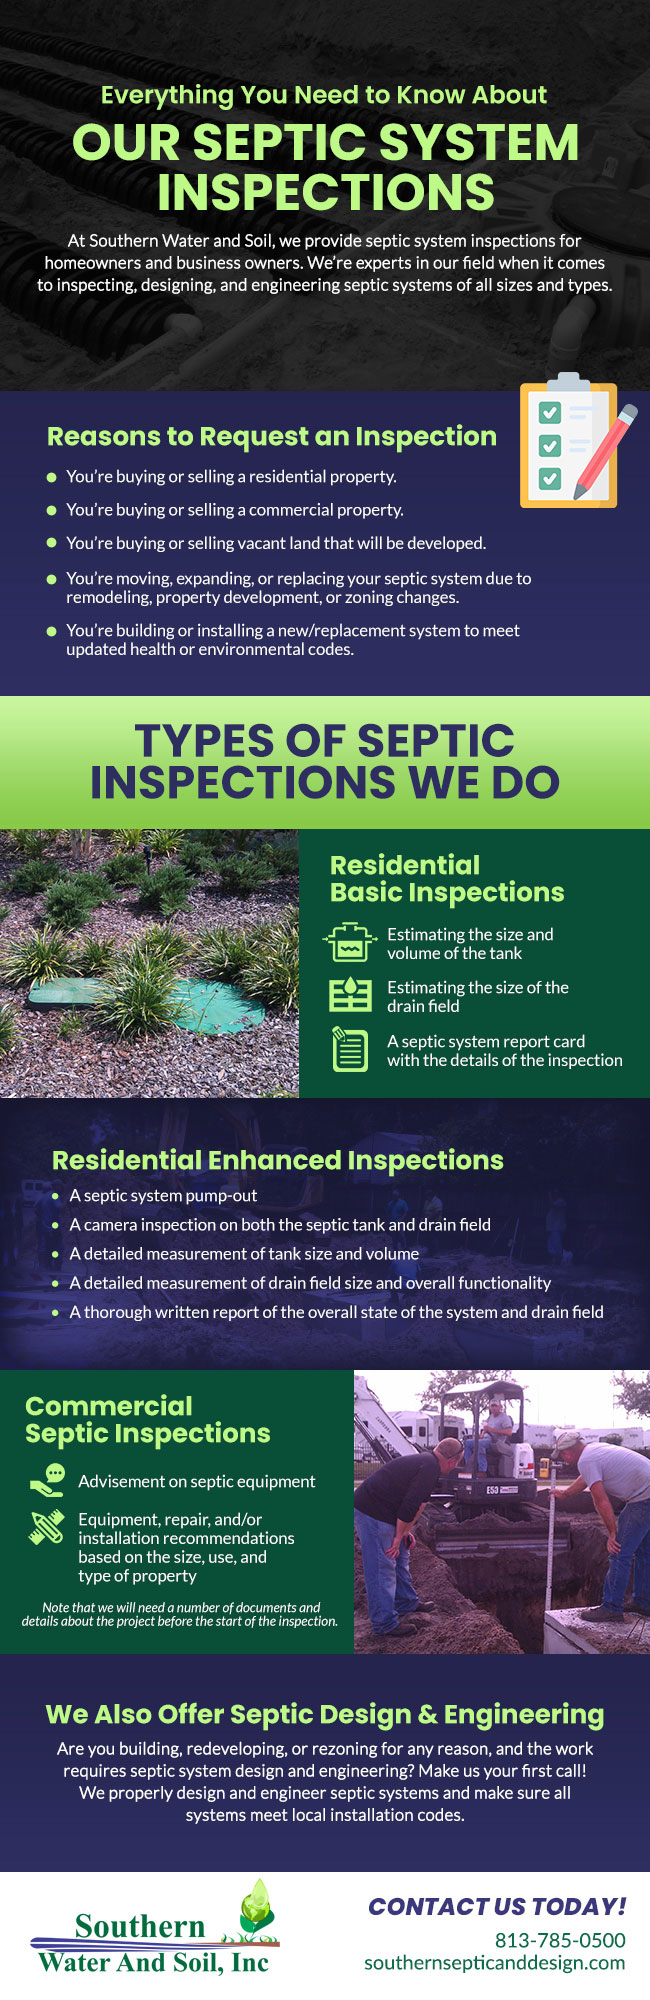 Everything You Need to Know About Our Septic System Inspections